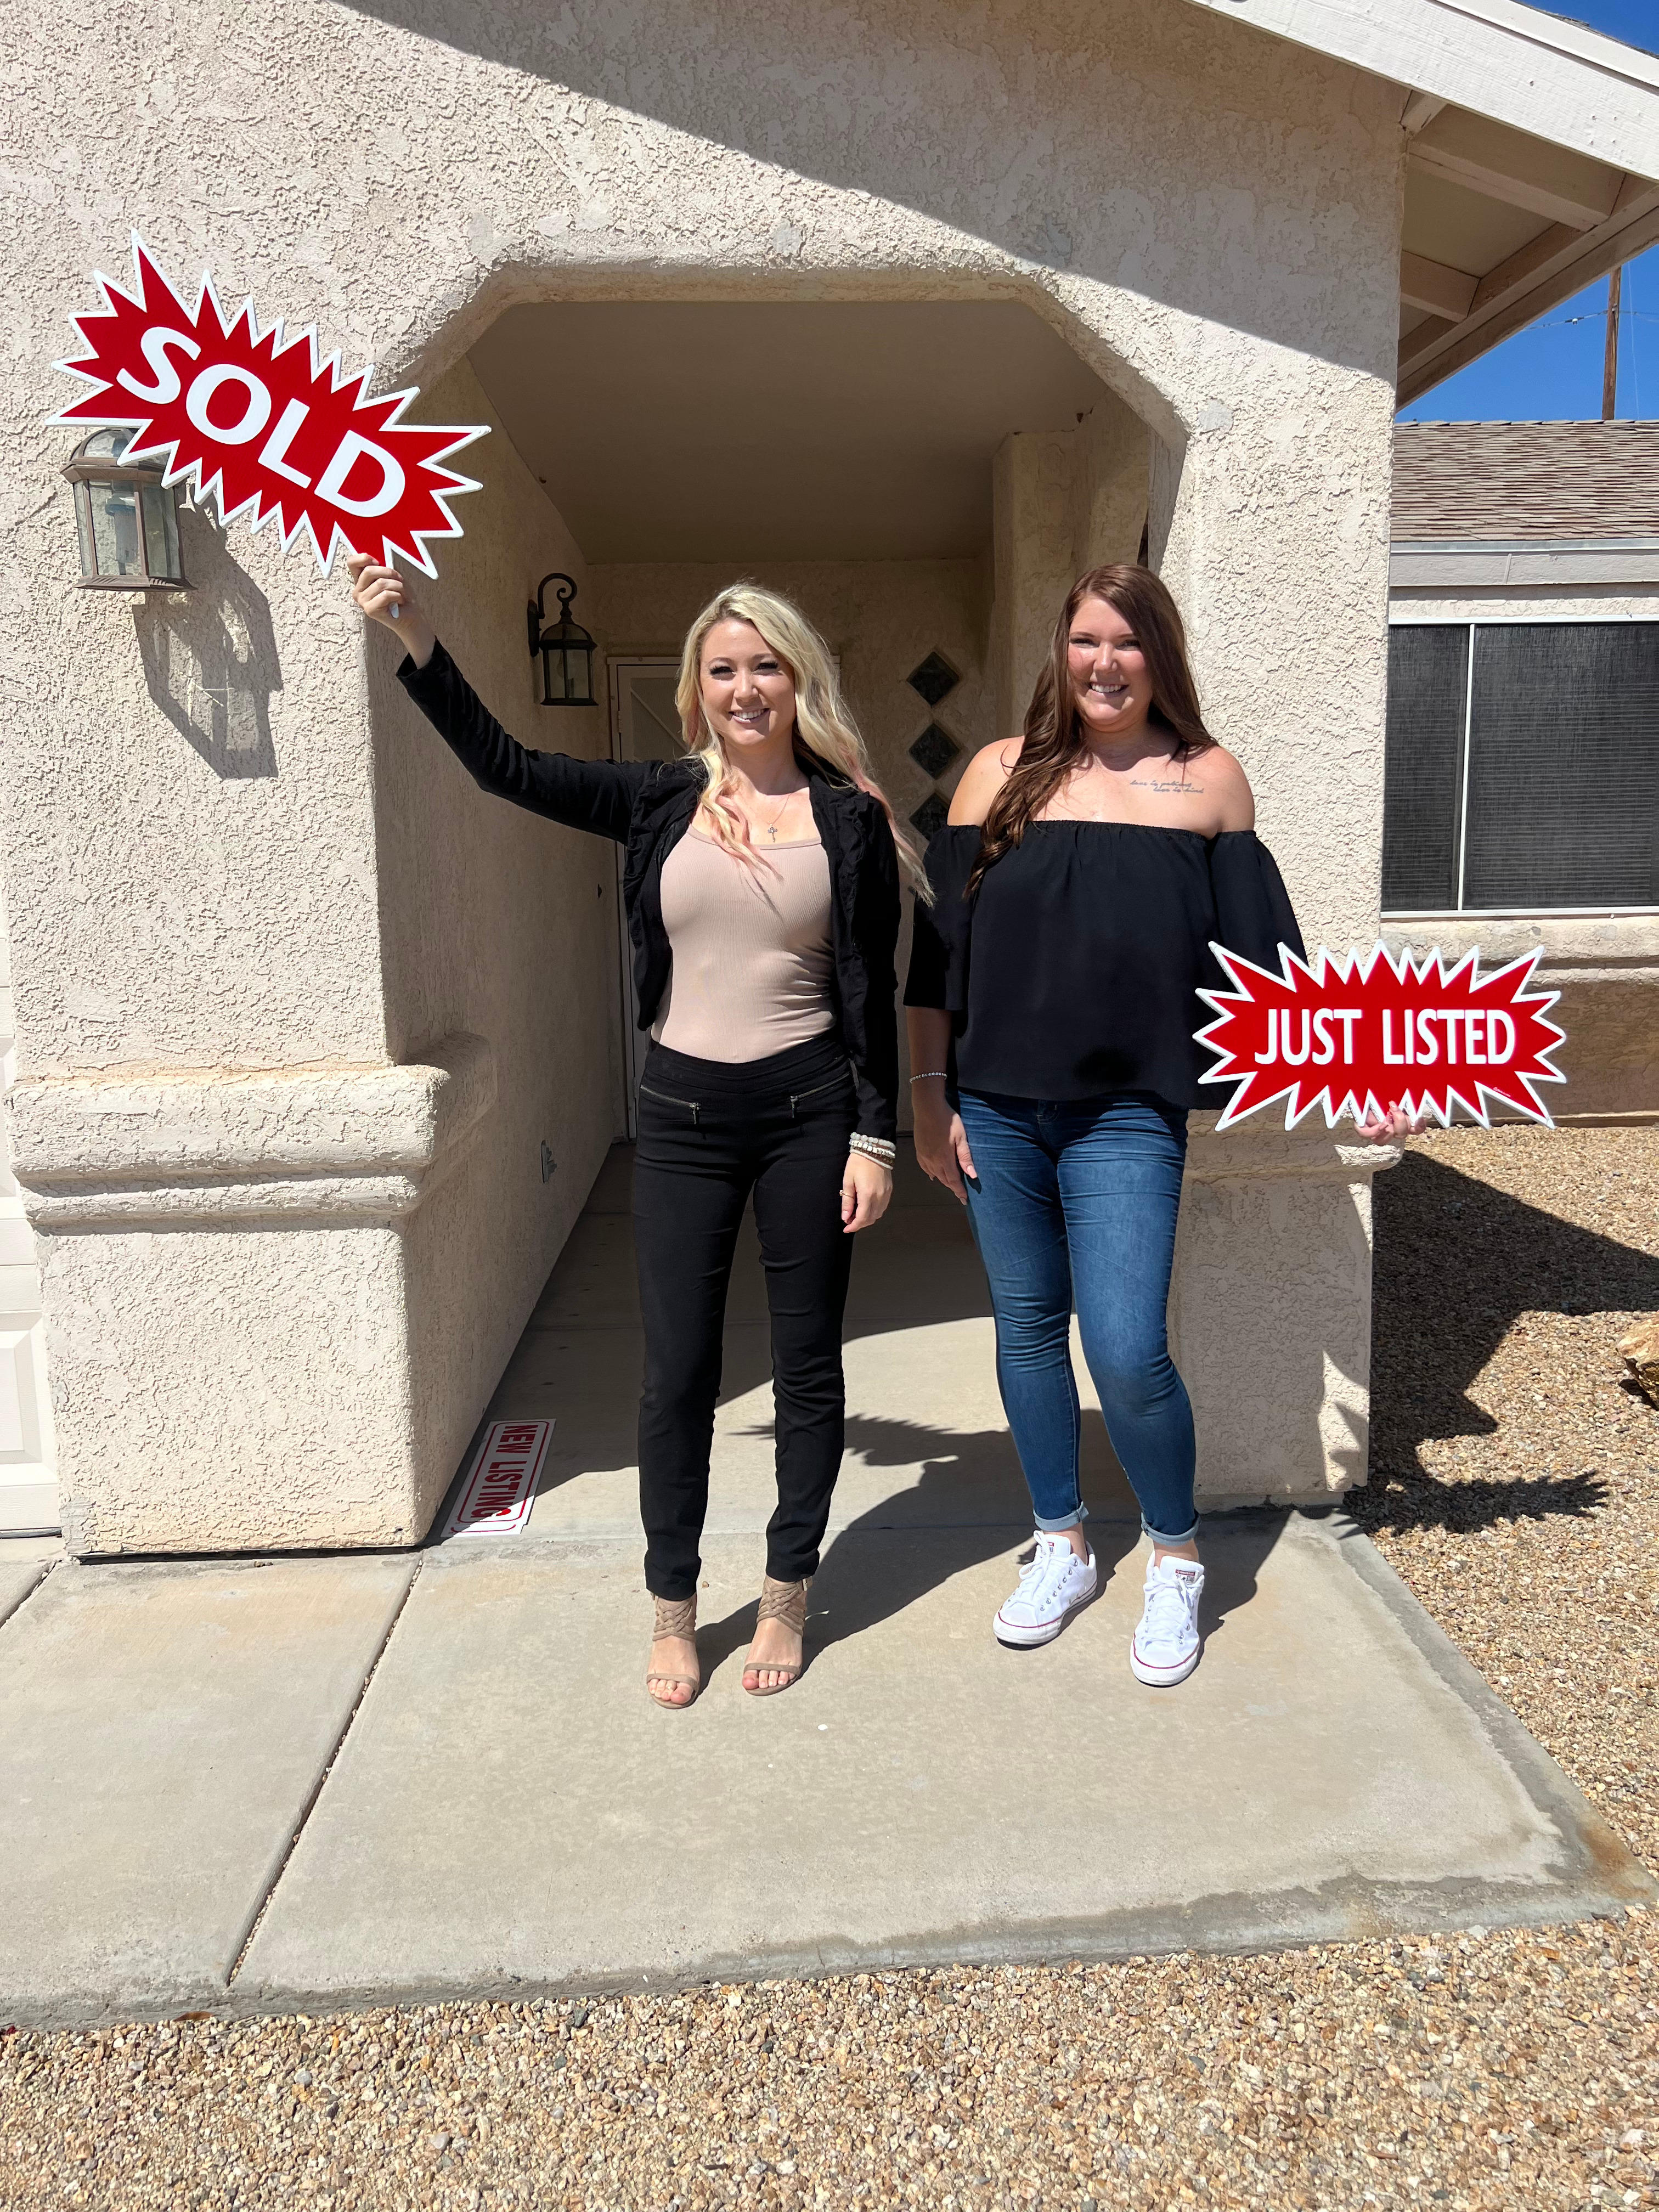 If you're looking to buy a house in Bullhead City with a great view, contact one of our real estate agents! There is a reason we have almost 300 five-star reviews on the Internet! Experience The Gedalje Group for yourself!